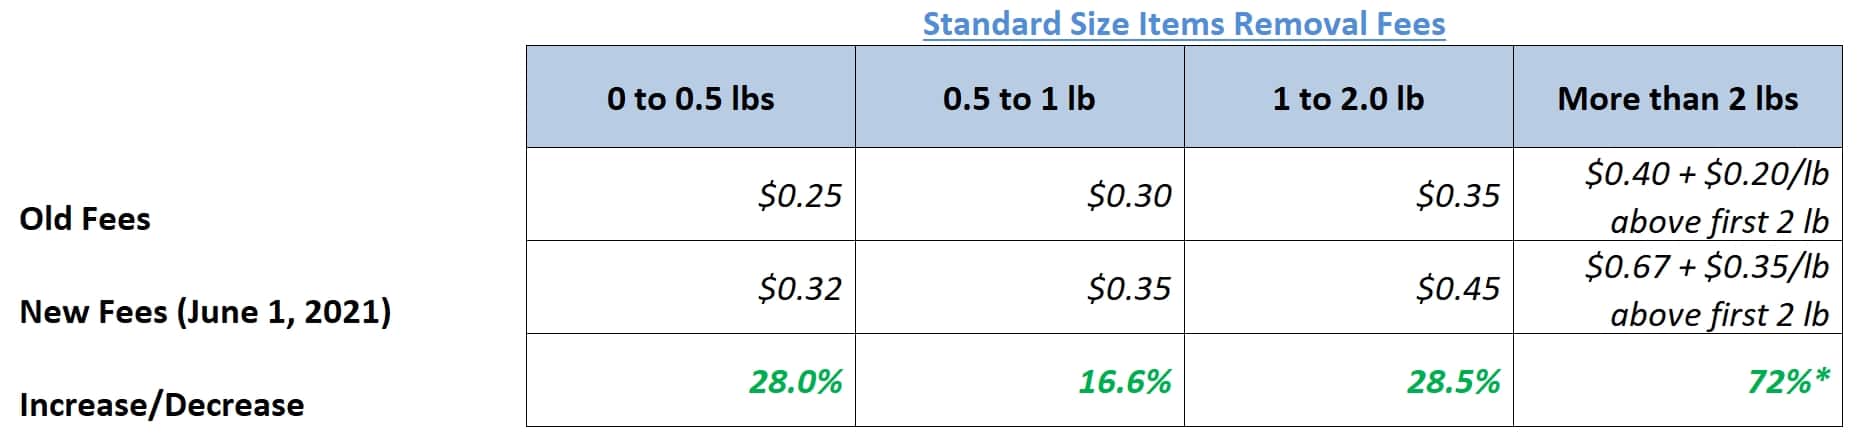 standard size item removal fees